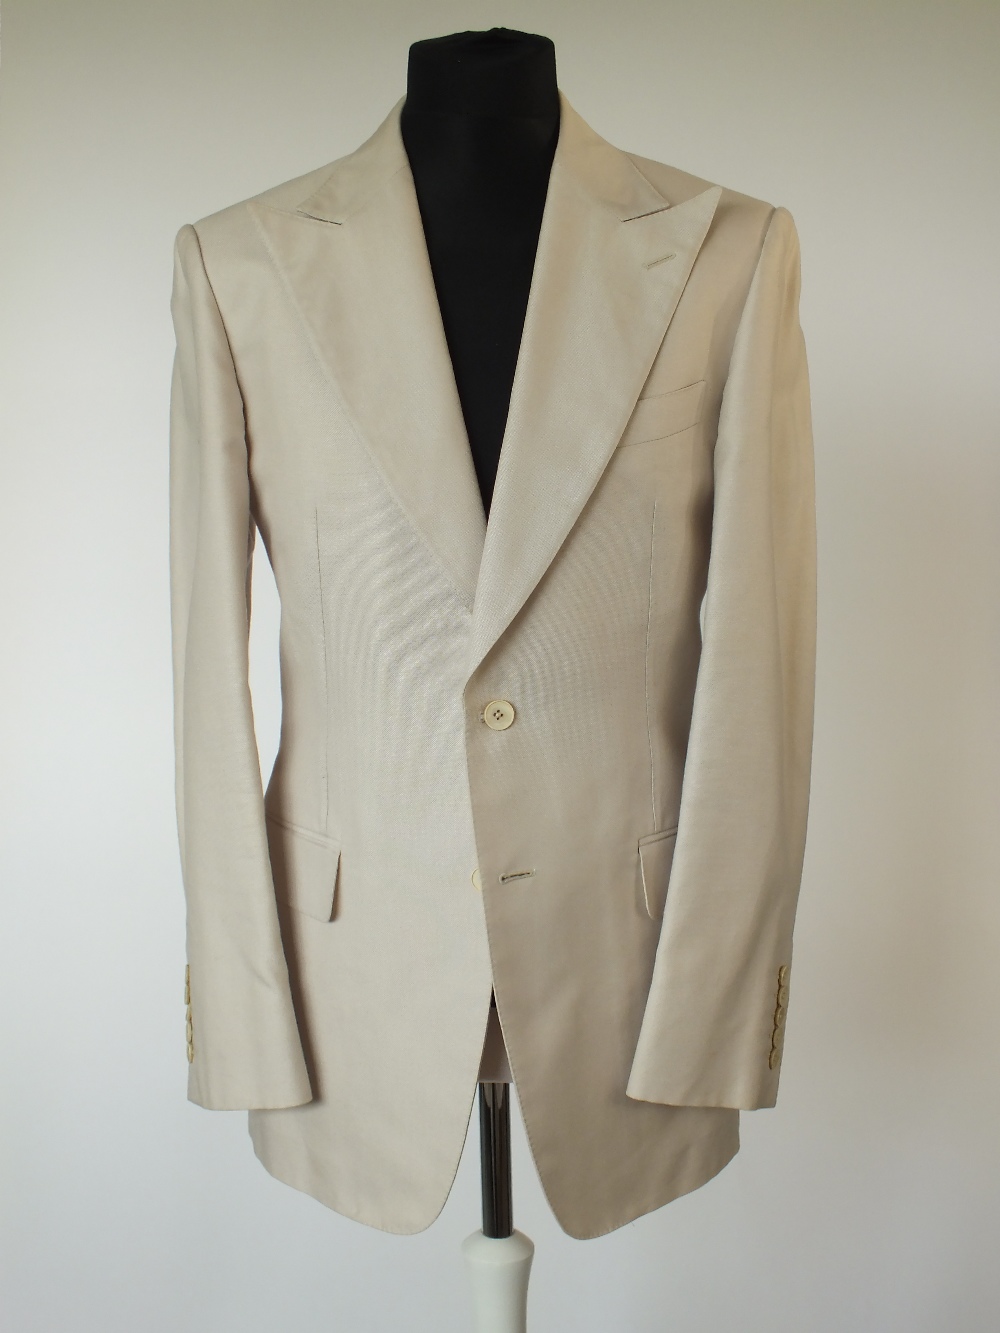 A Gucci suit, stone, double vent, Italian size 50R, 100% cotton, flat front , button fly, signs of